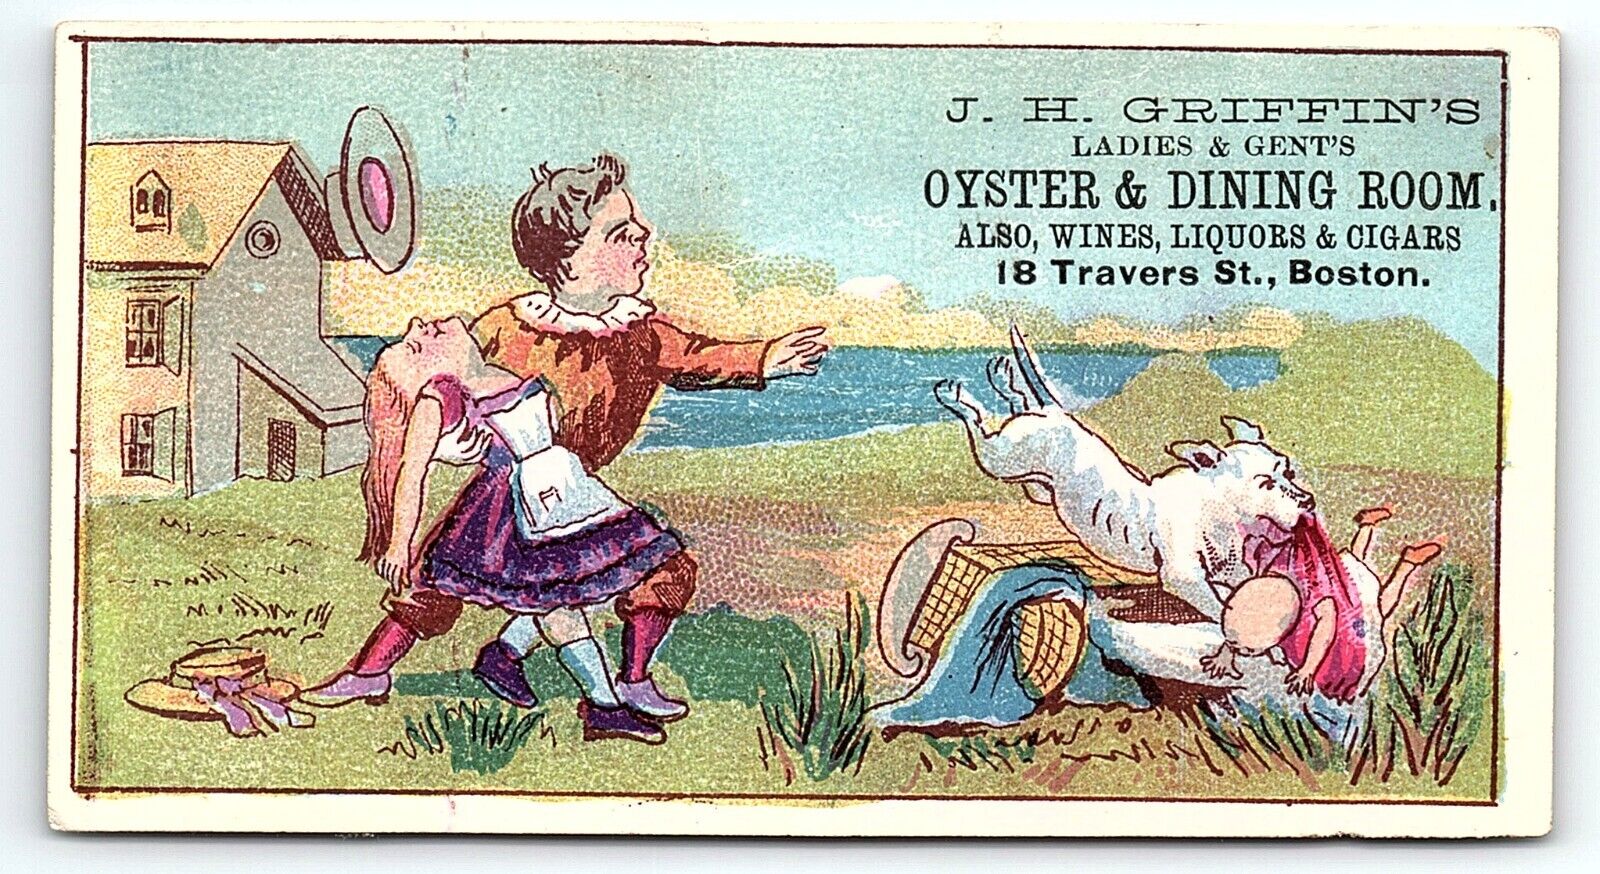 c1880 J H GRIFFIN\'S OYSTER & DINING ROOM LIQUORS CIGARS BOSTON TRADE CARD Z1208